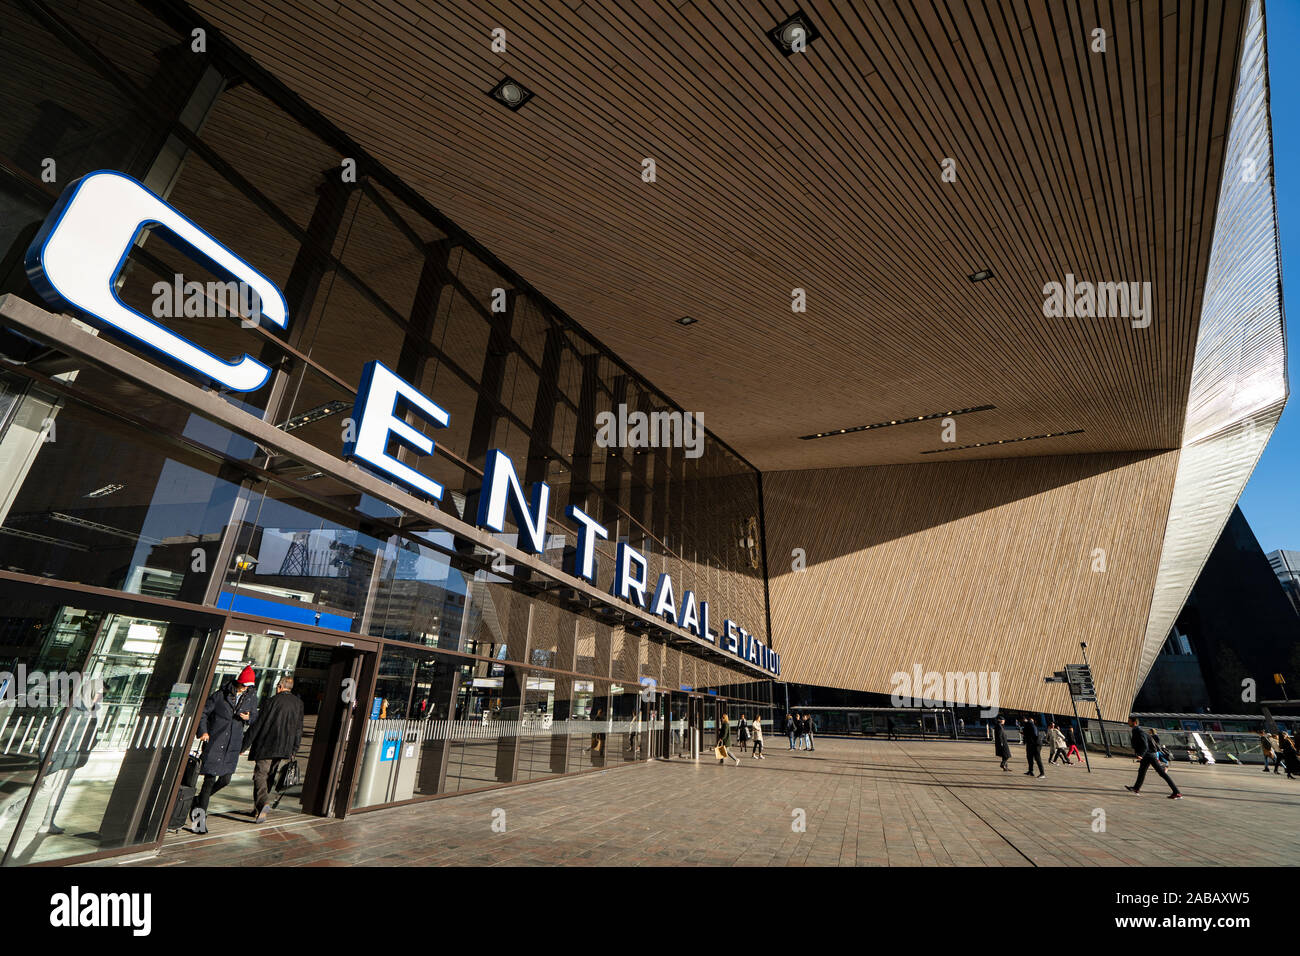 Exterior of new Centraal Station in Rotterdam, The Netherlands Stock Photo